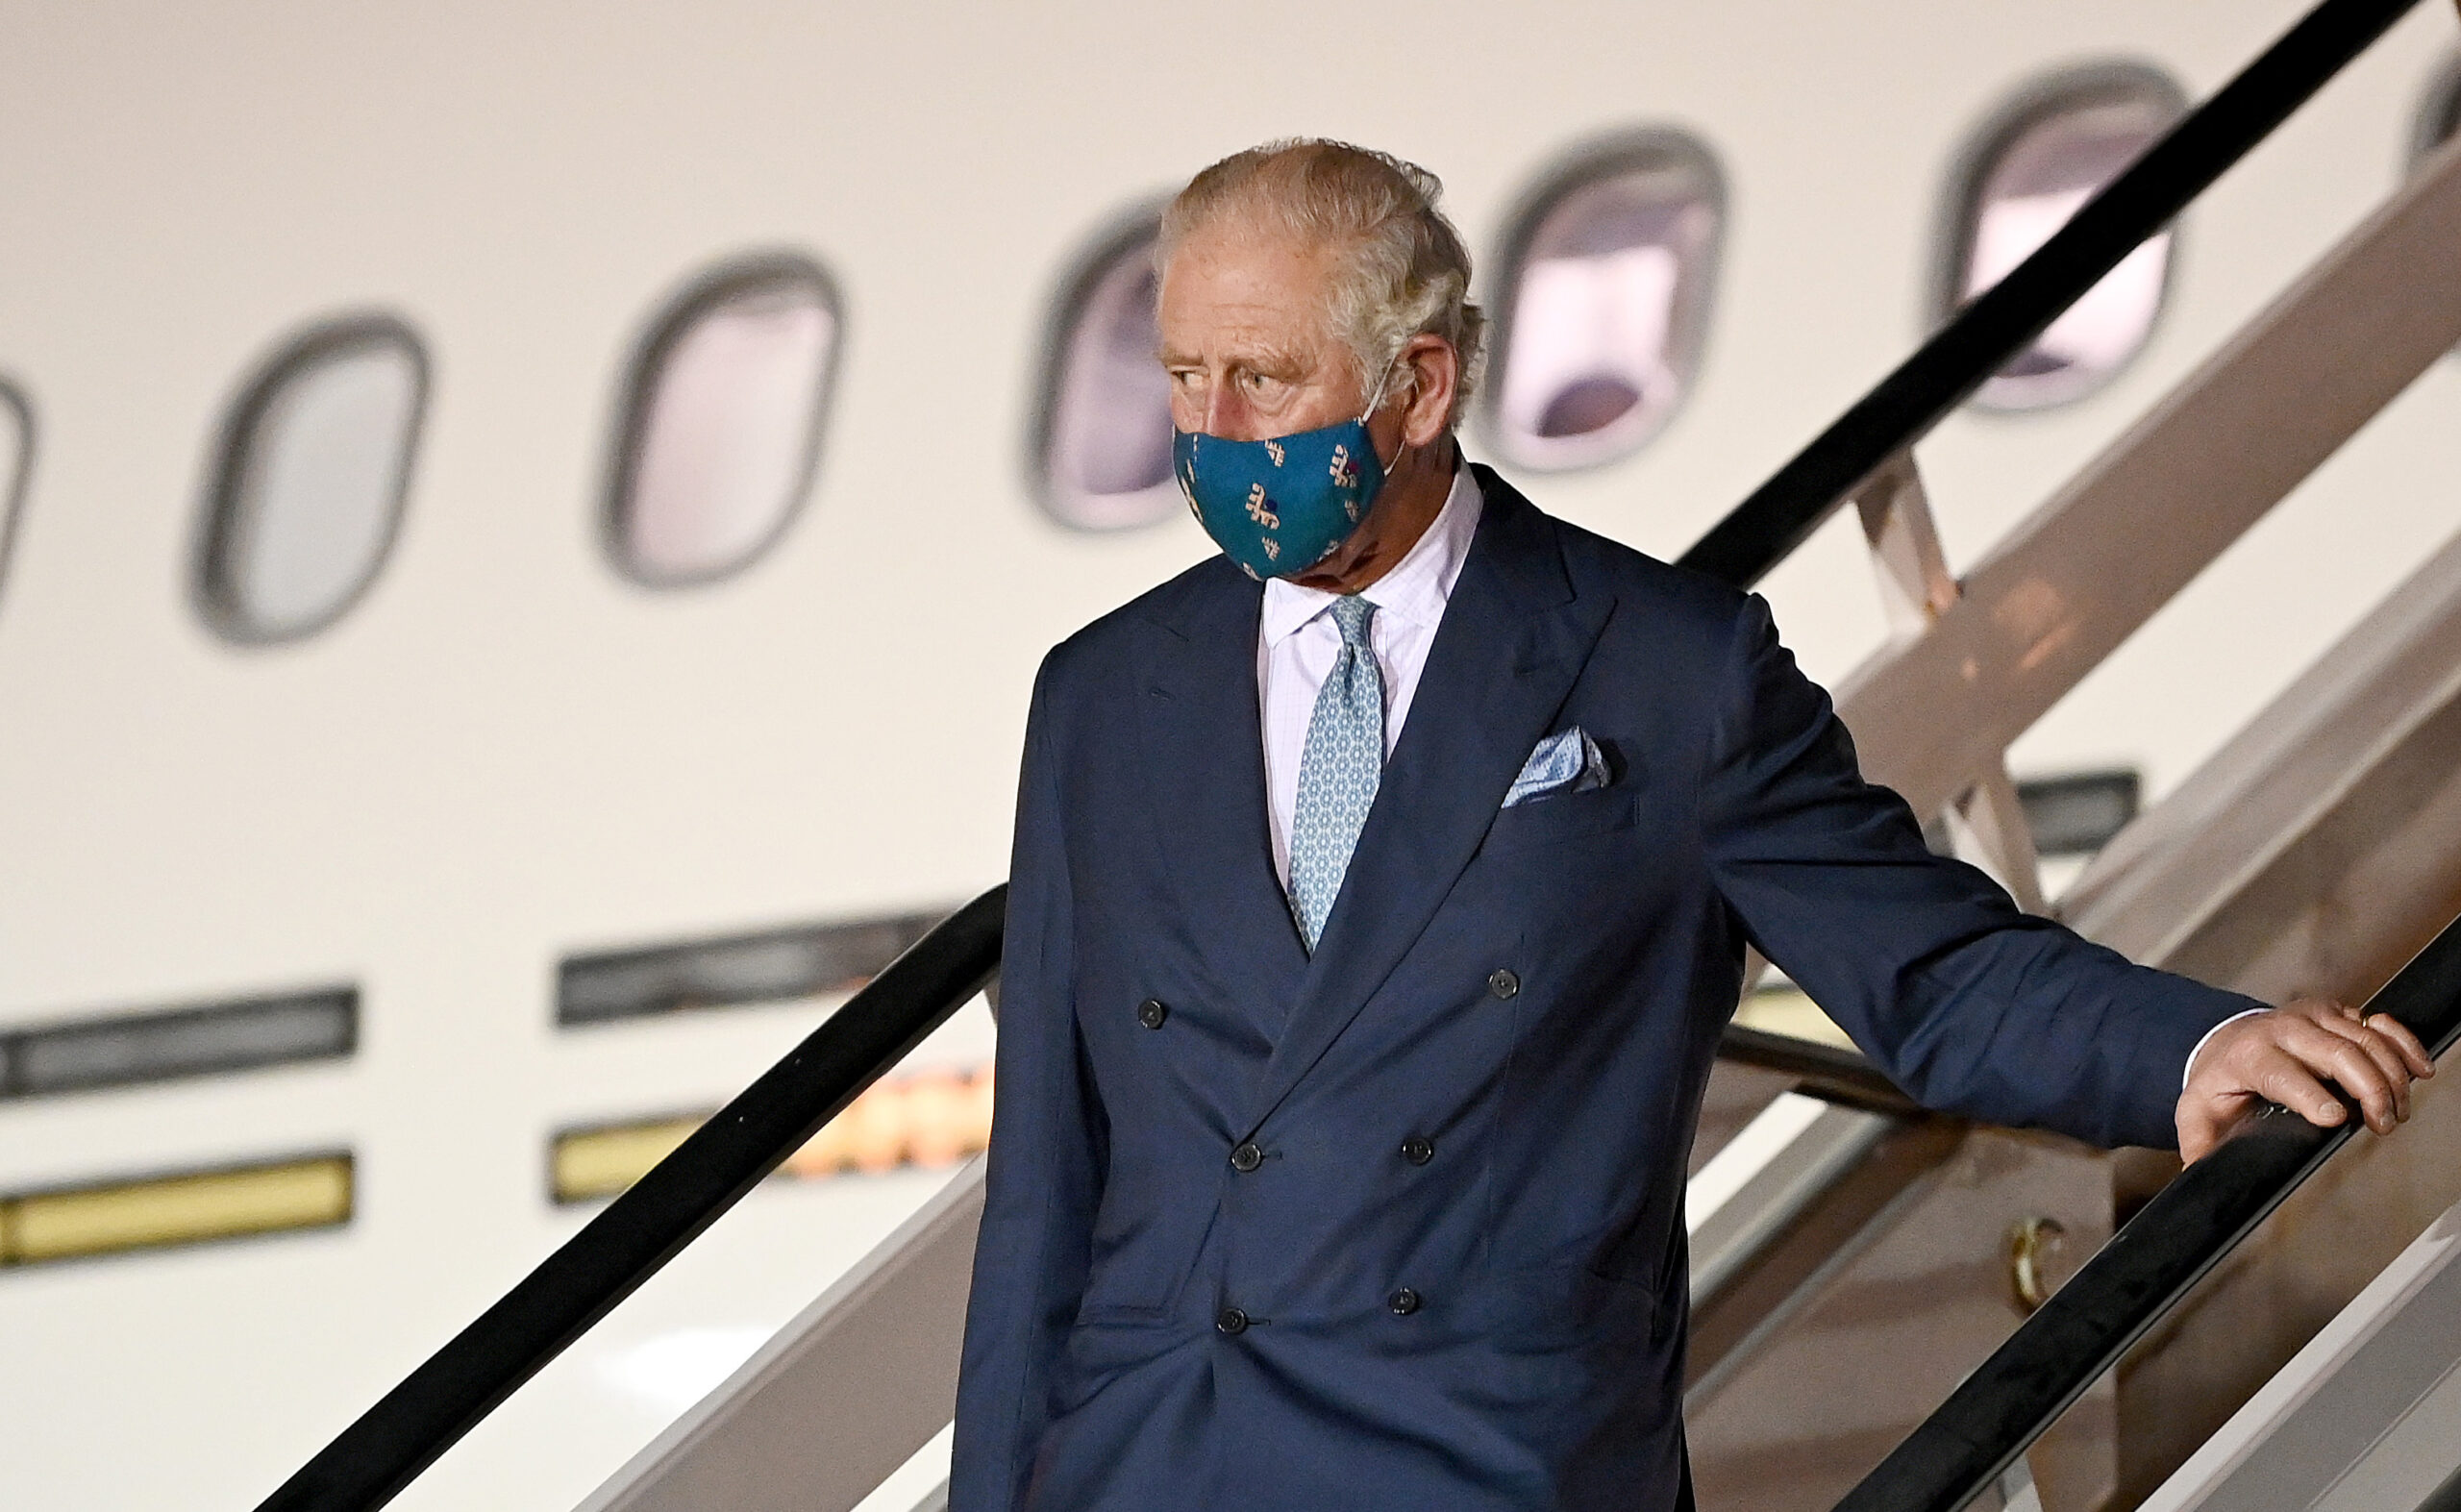 Prince Charles lands in a nation he will never rule as Barbados officially becomes a republic